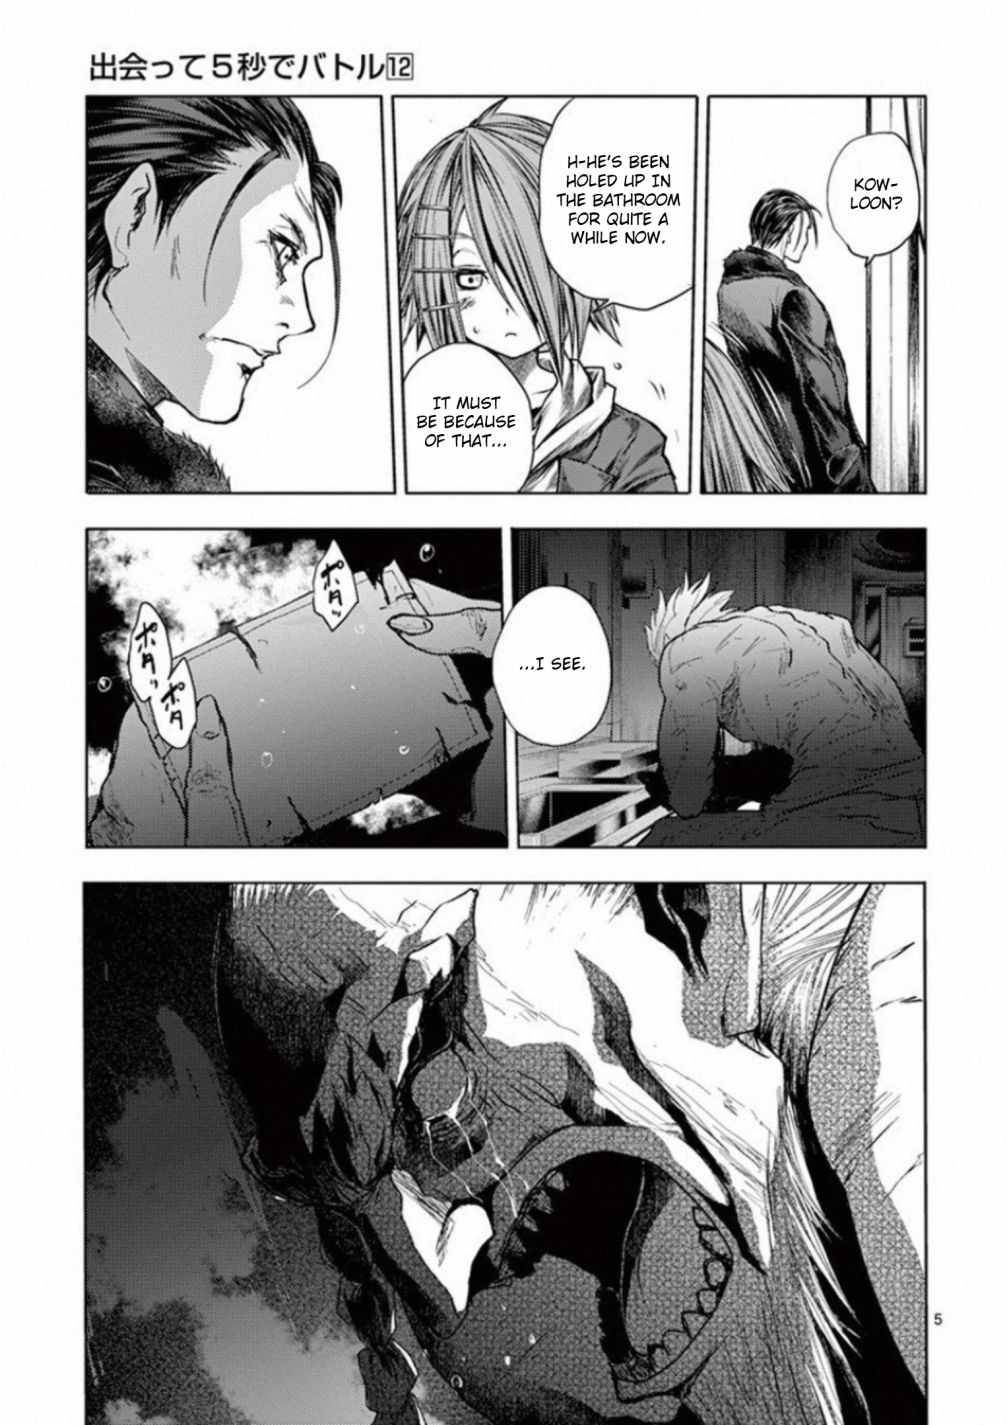 Start Fighting 5 Seconds After Meeting - chapter 97 - #5